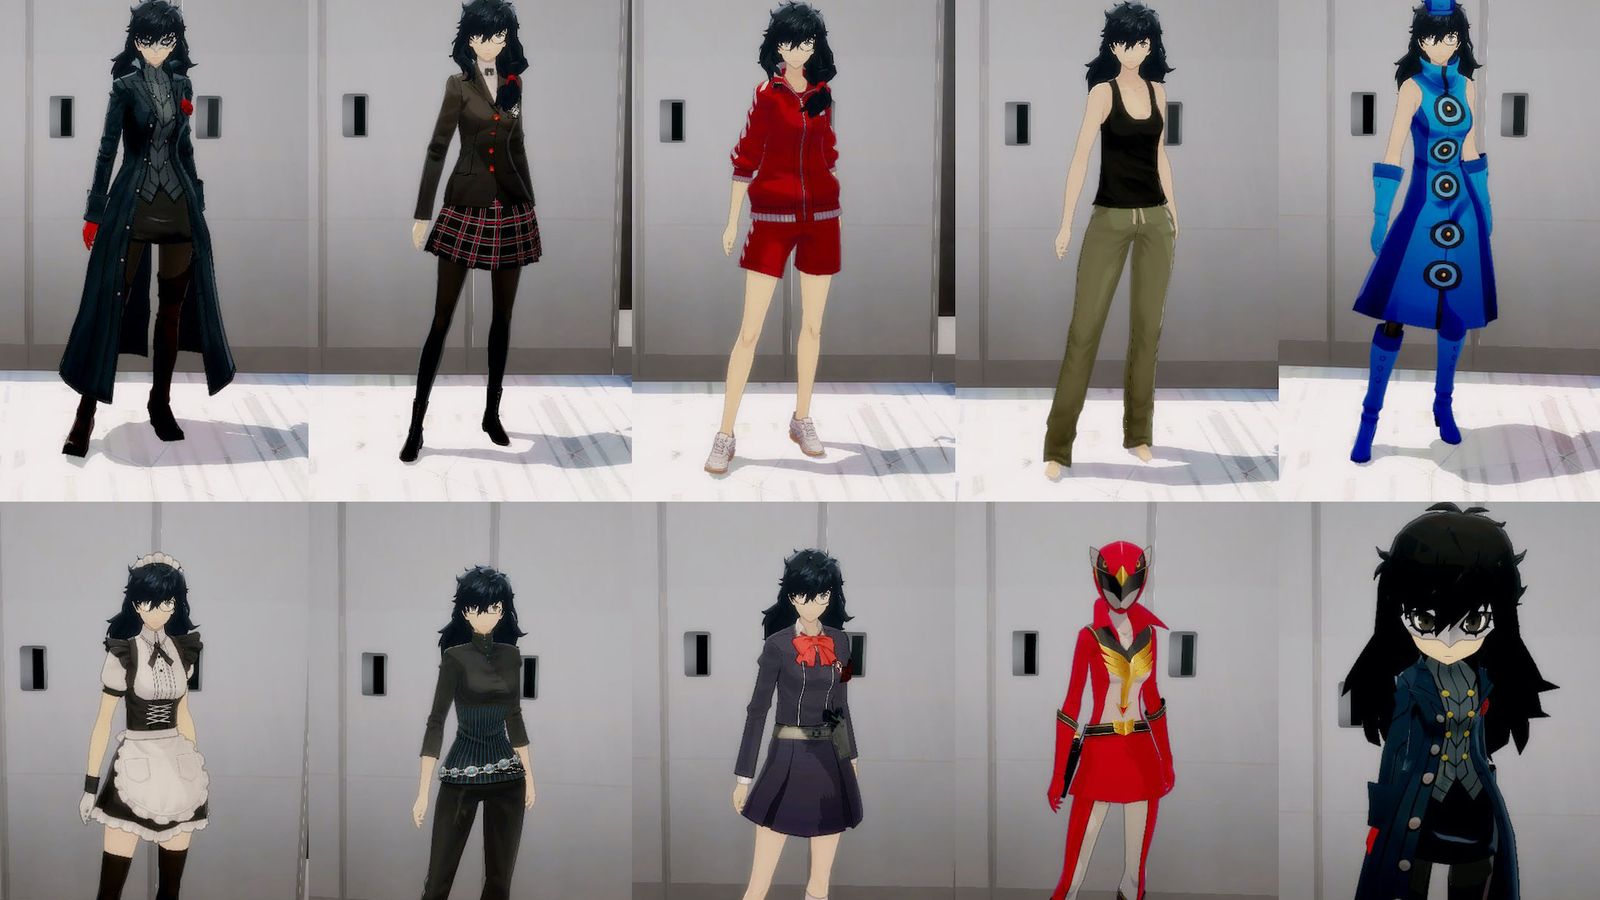 This impressive mod now lets you play Persona 5 Royal as a woman